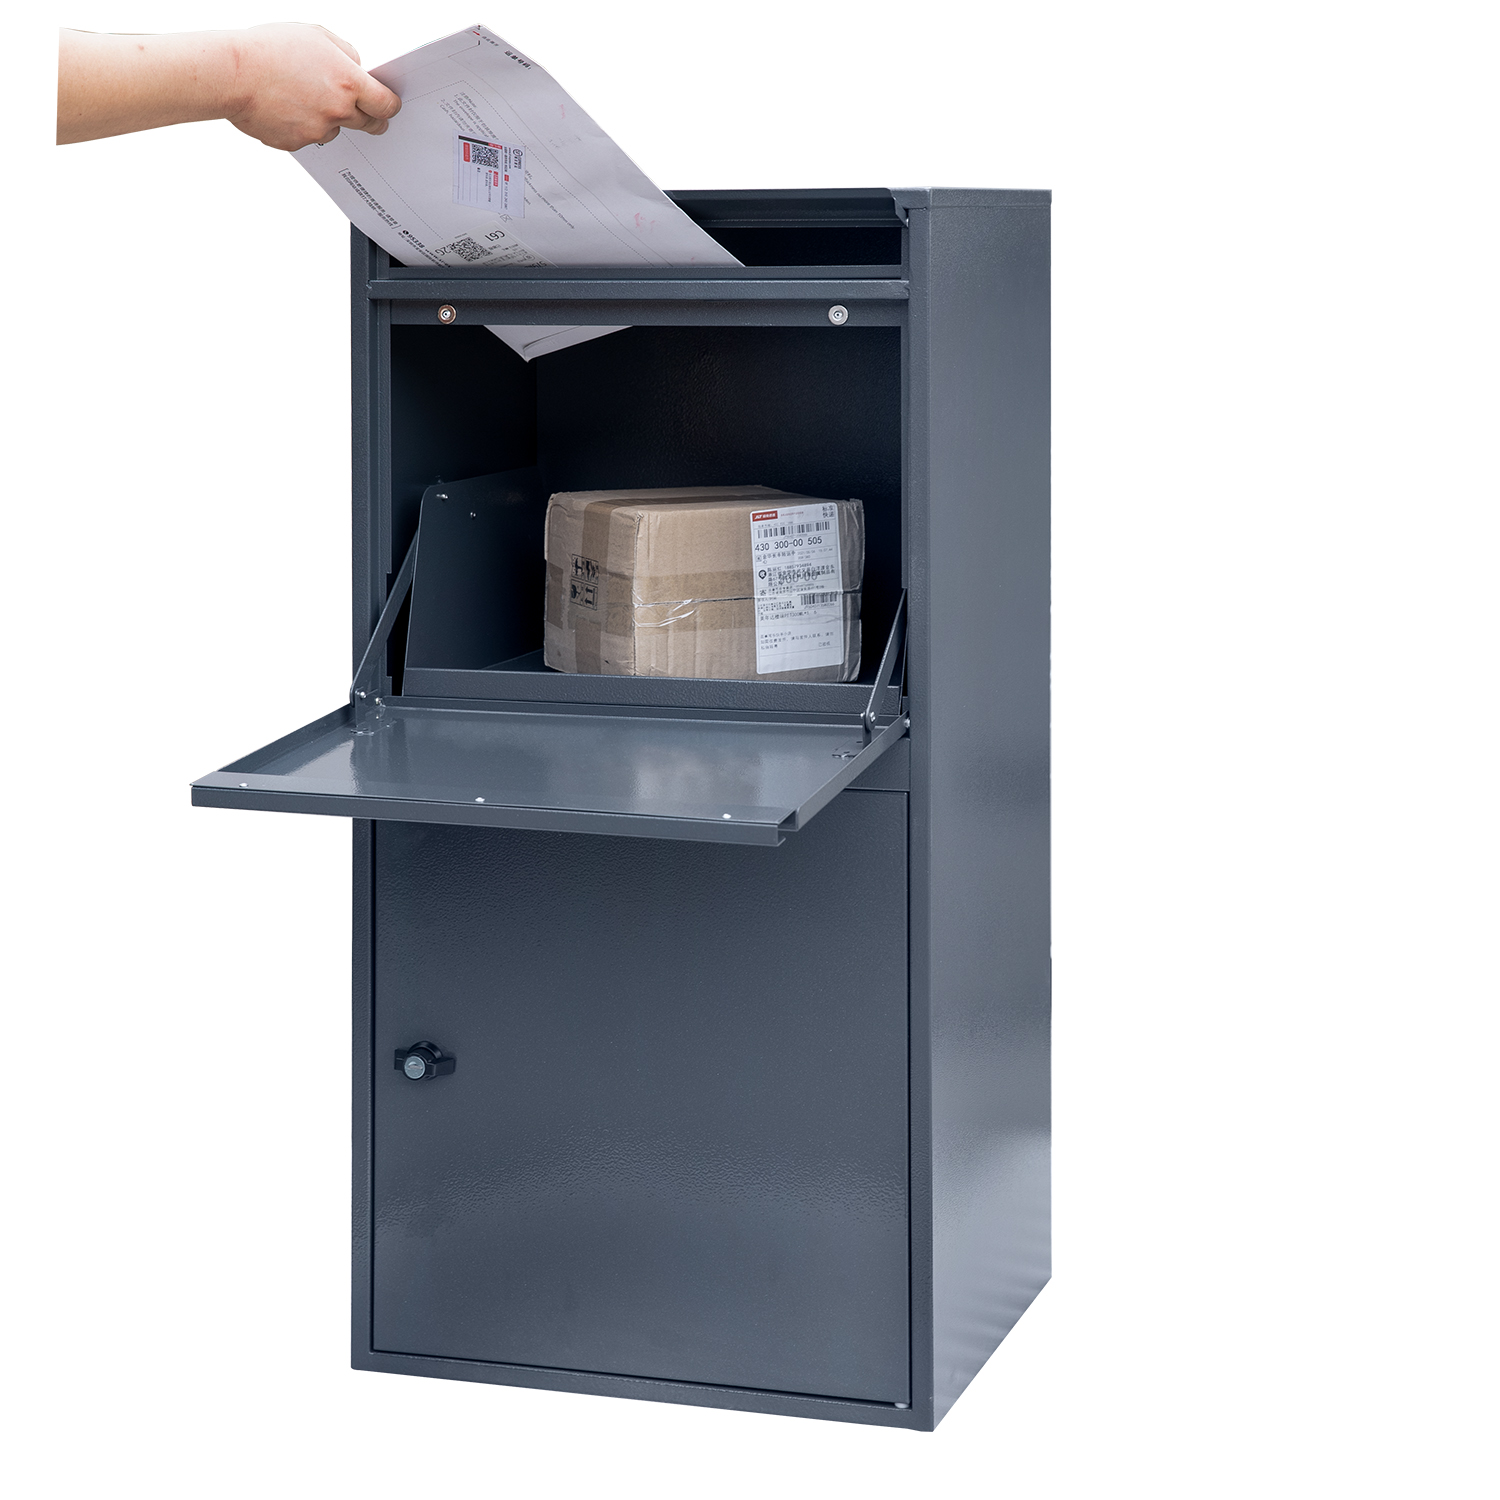 Home Stainless Steel Outdoor Delivery Parcel Lockable Mail Drop Box